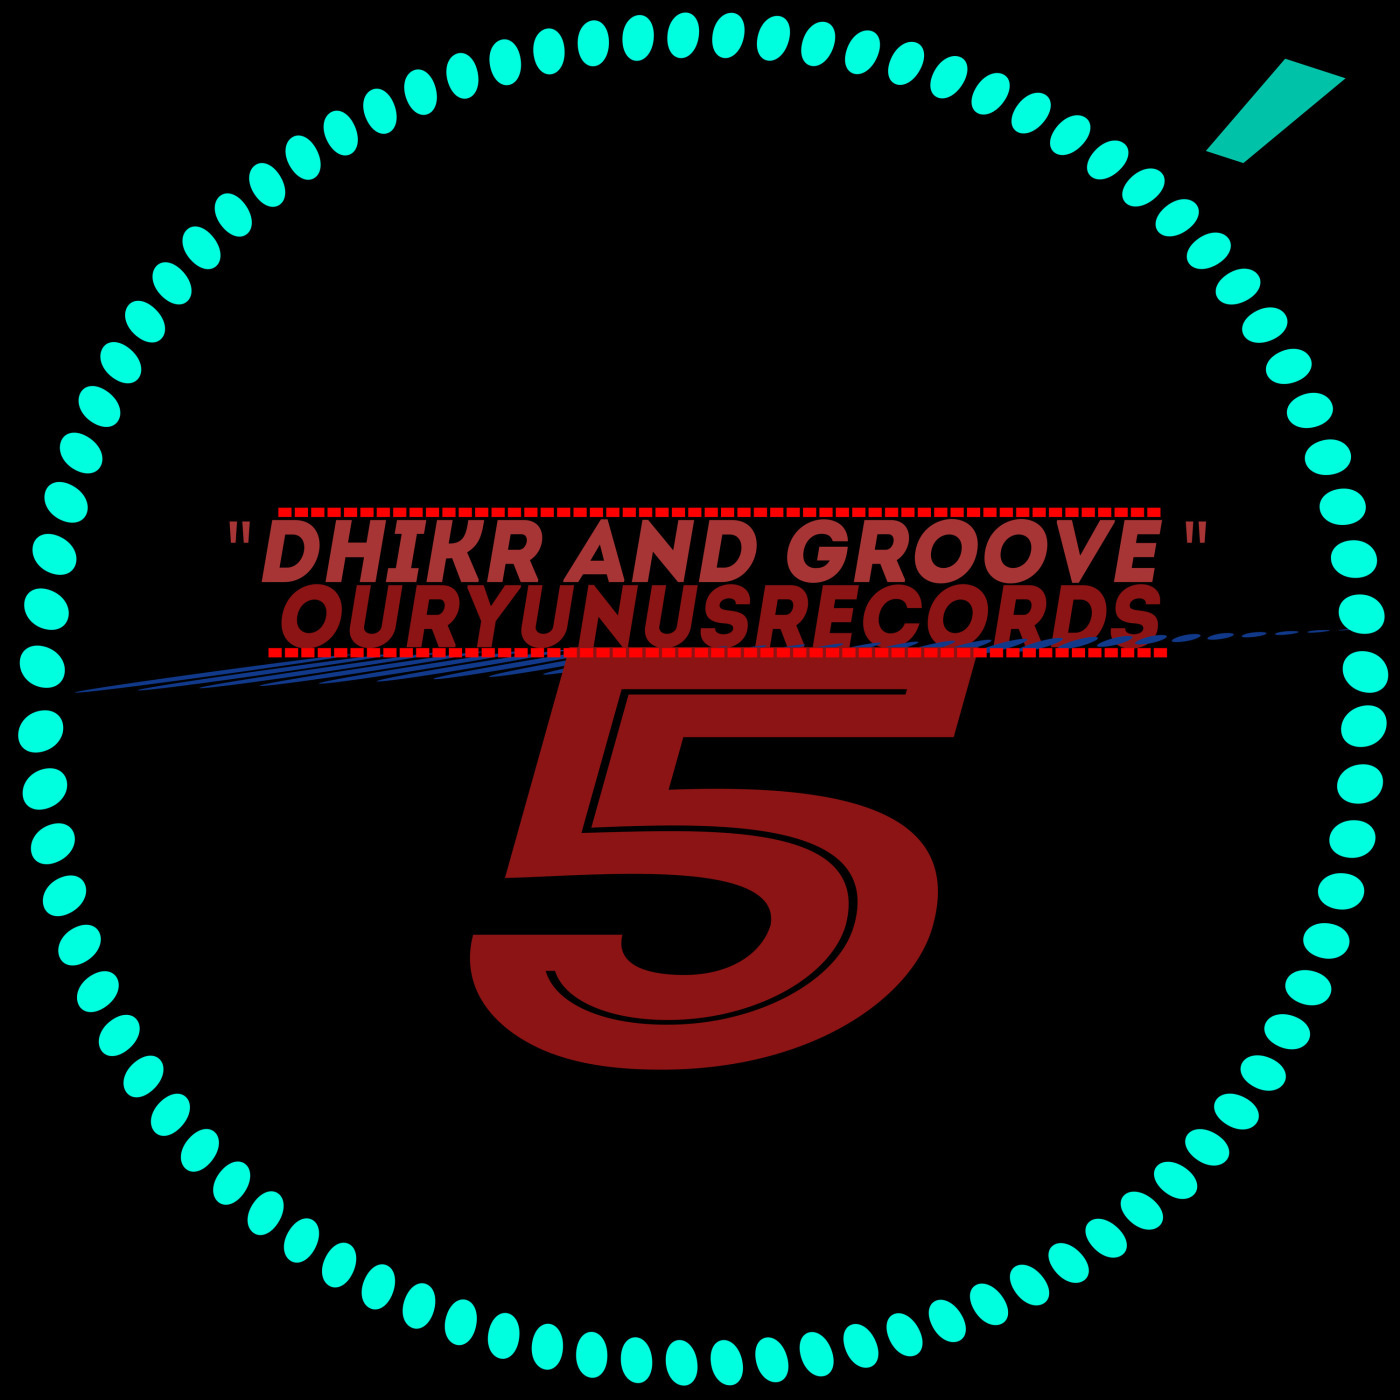 Jonasclean - Dhikr and Groove 5 / Our Yunus Records